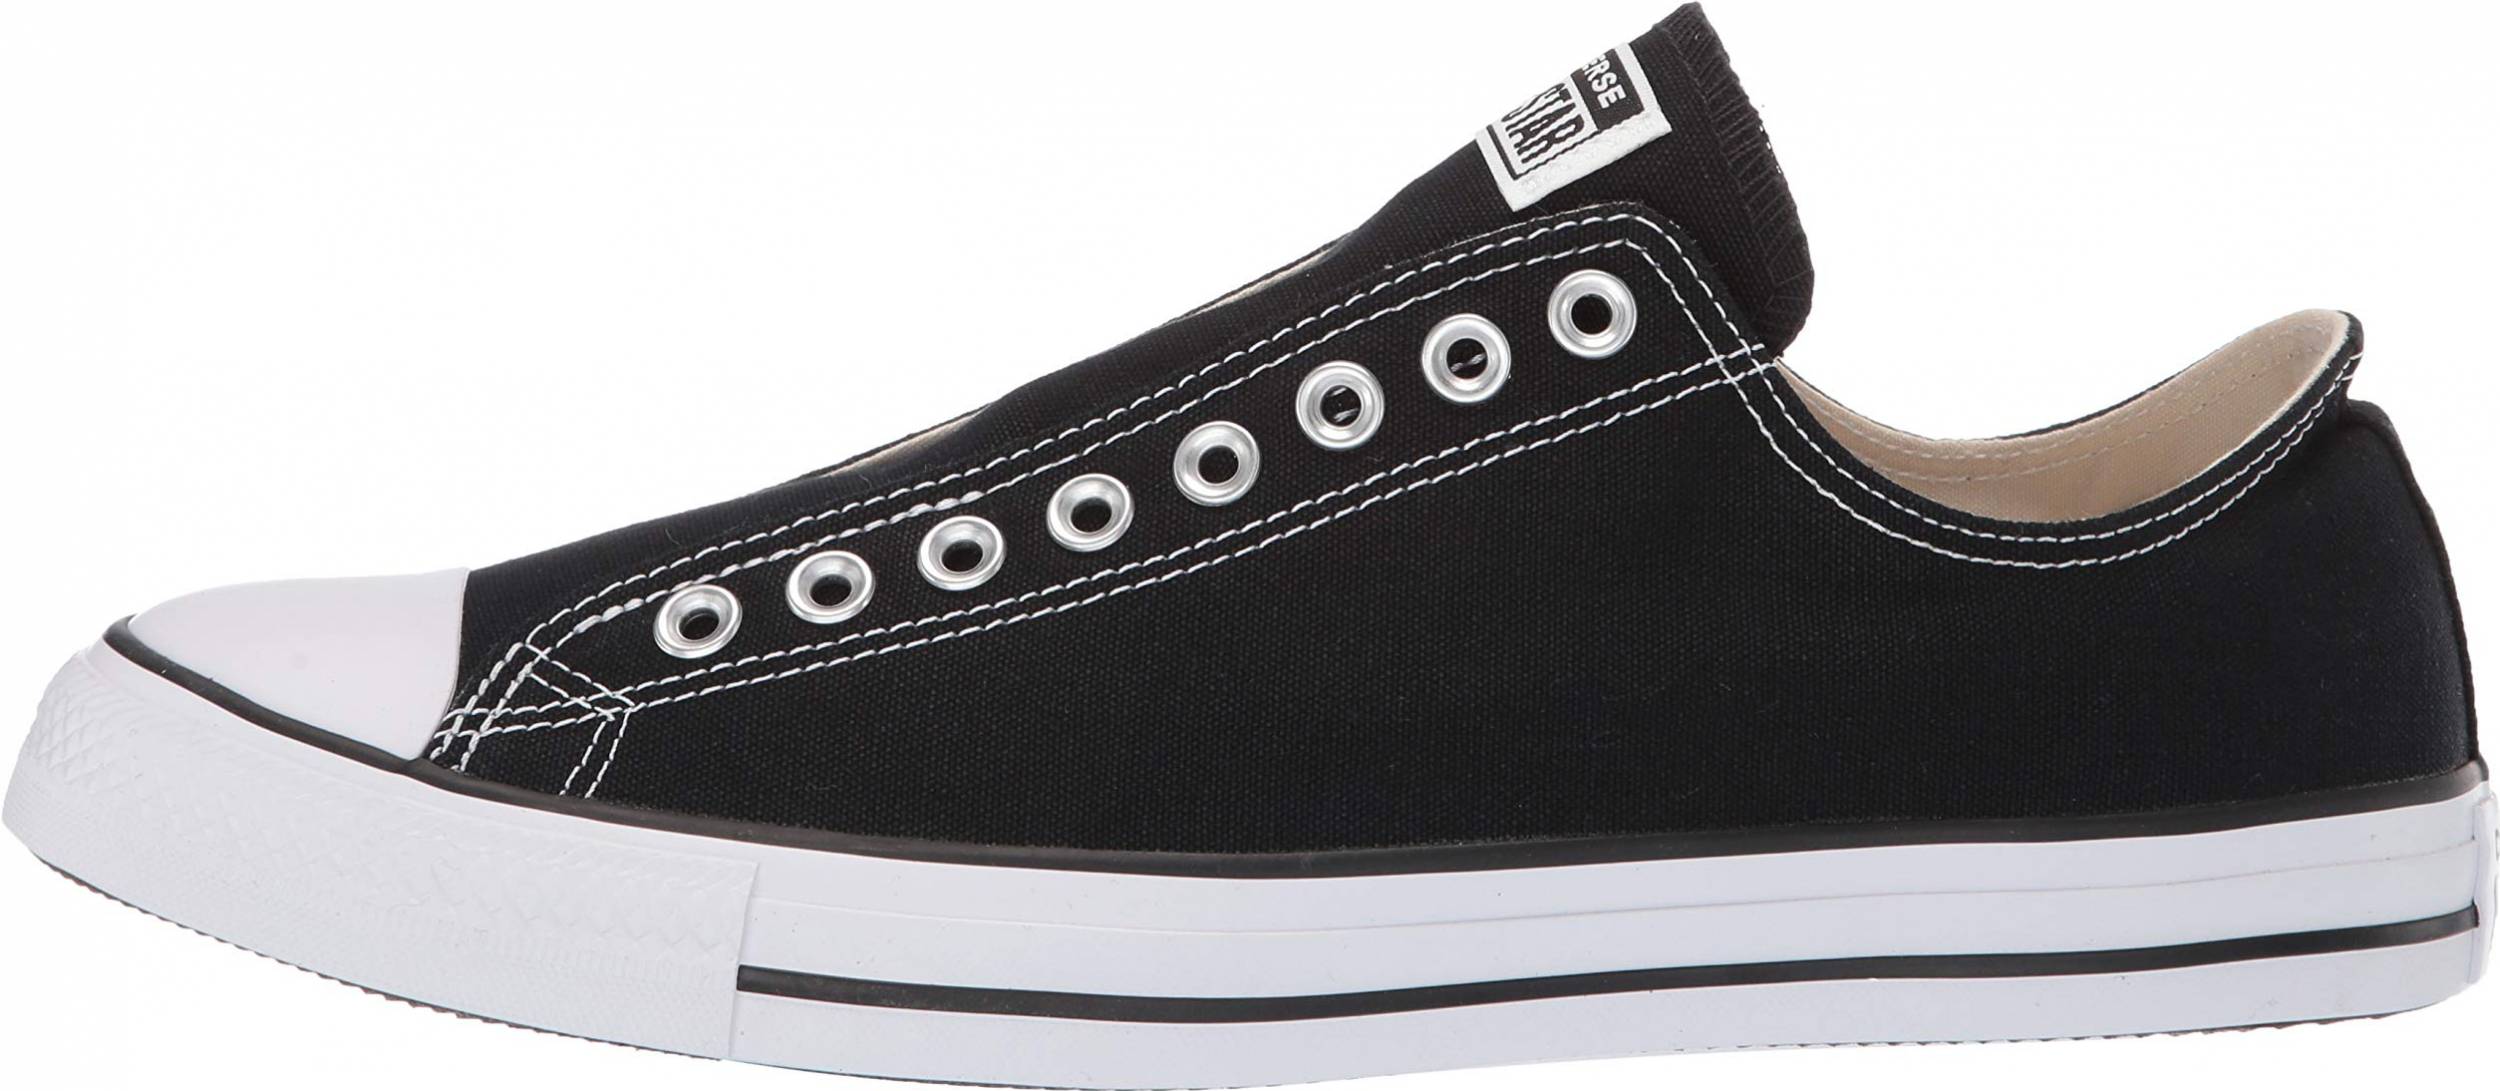 Converse Chuck Taylor All Star Slip sneakers in 6 colors | RunRepeat